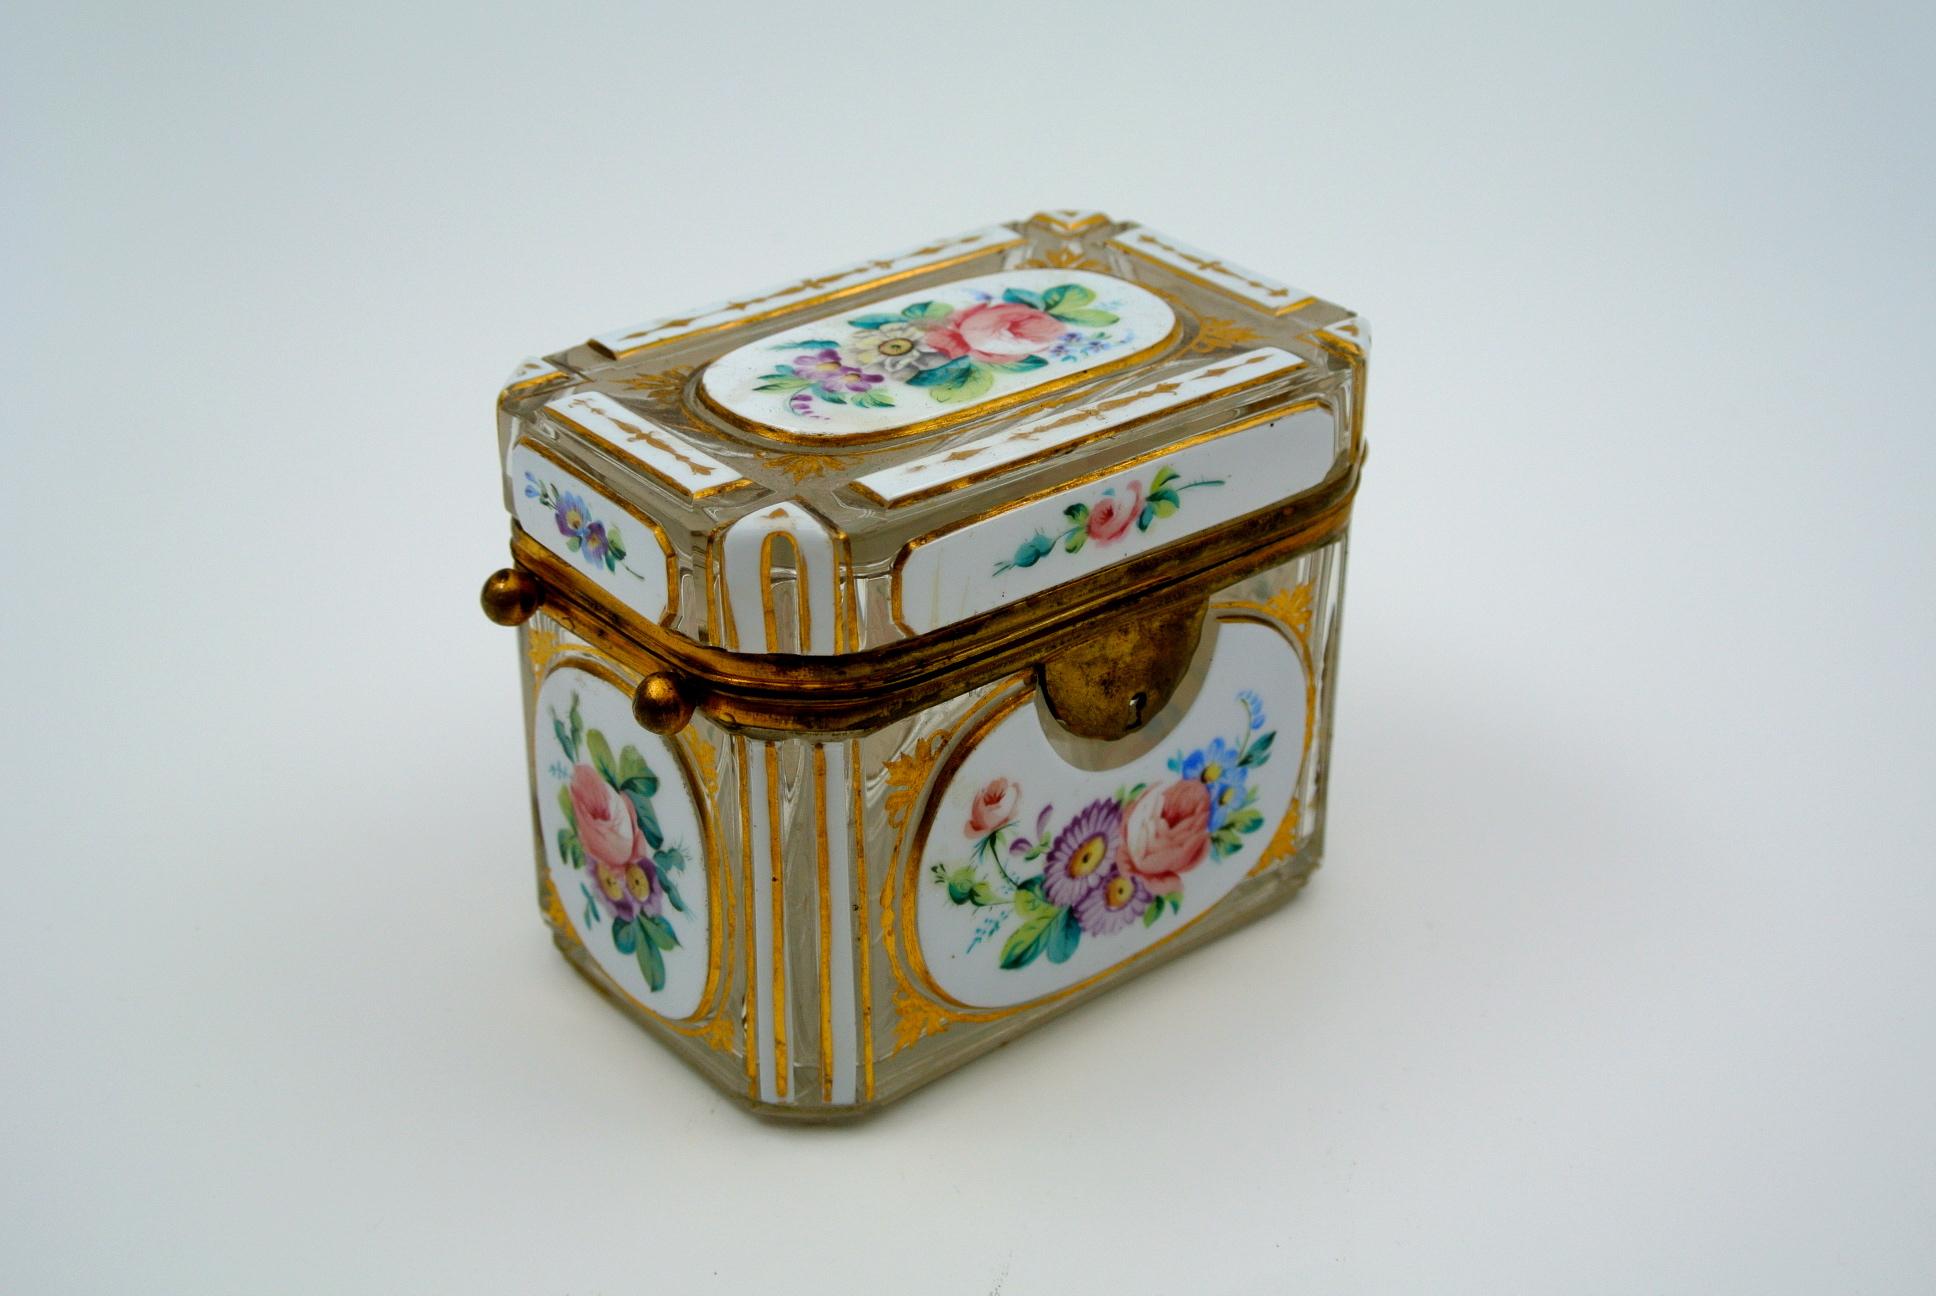 White Bohemian crystal box with white overlay and enameled flowers, small break on the side of the lid not very visible, 19th century, Napoleon III.

Measures: H 9cm, L 11cm, W 11cm, D 7.5cm.